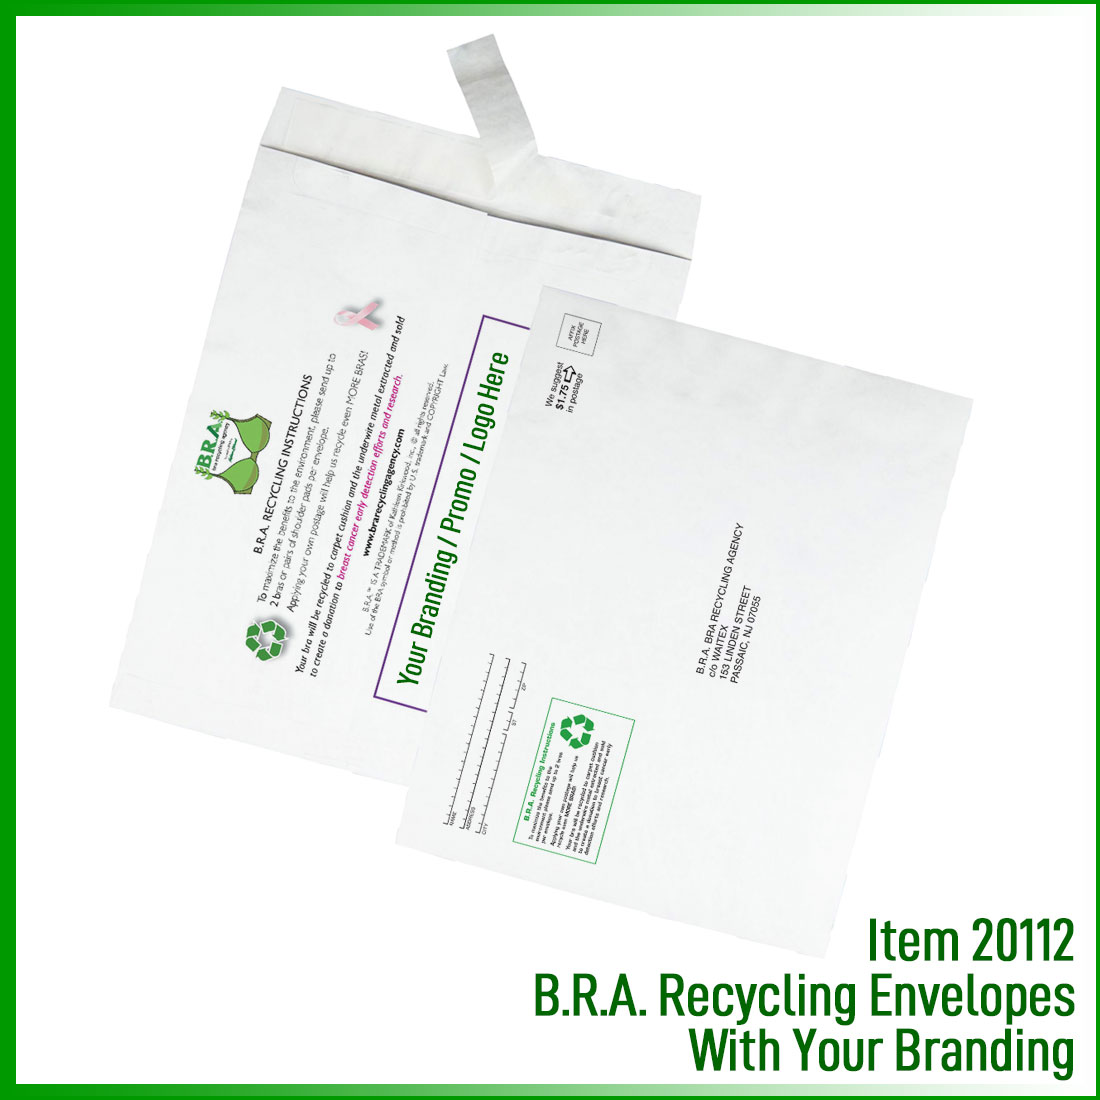 B.R.A. Recycling Envelopes (With Your Branding)  Bra Recycling Agency  B.R.A. Founded By Kathleen Kirkwood